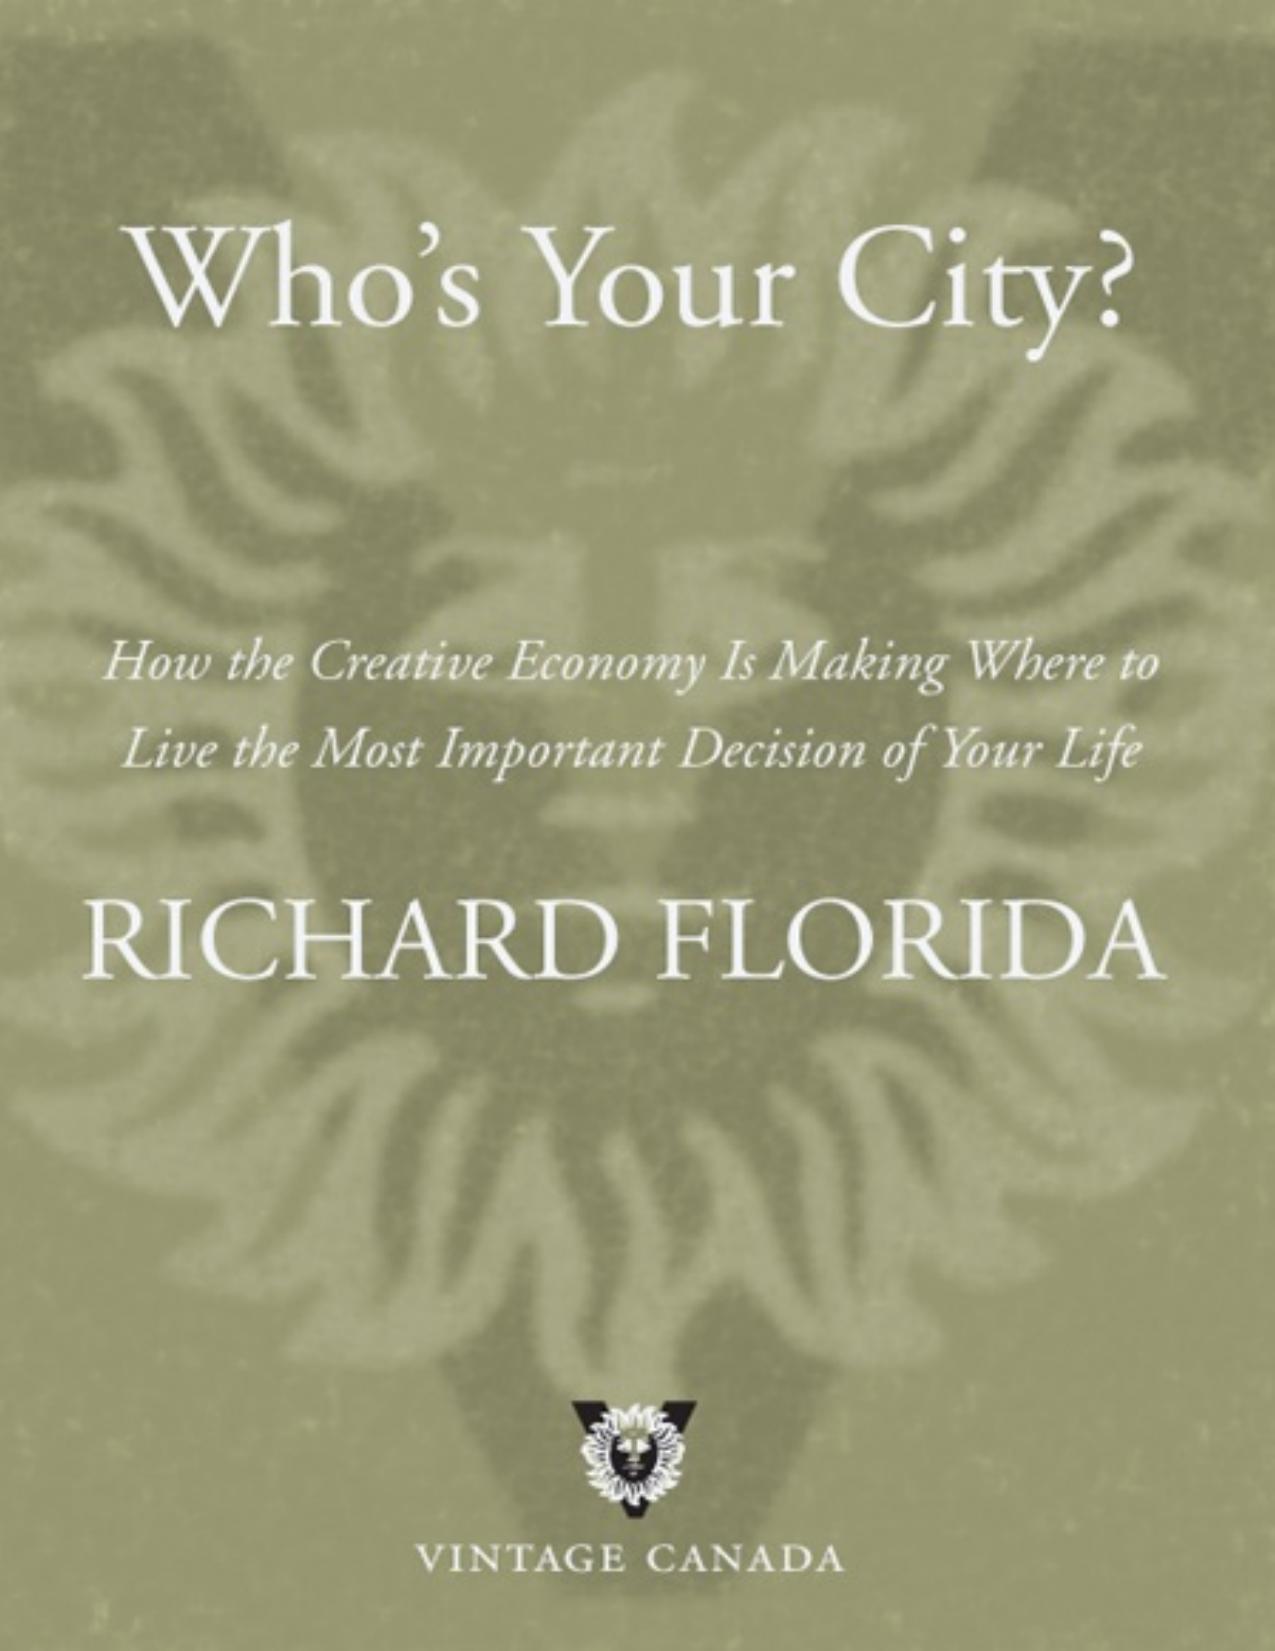 Who's Your City? by Richard Florida